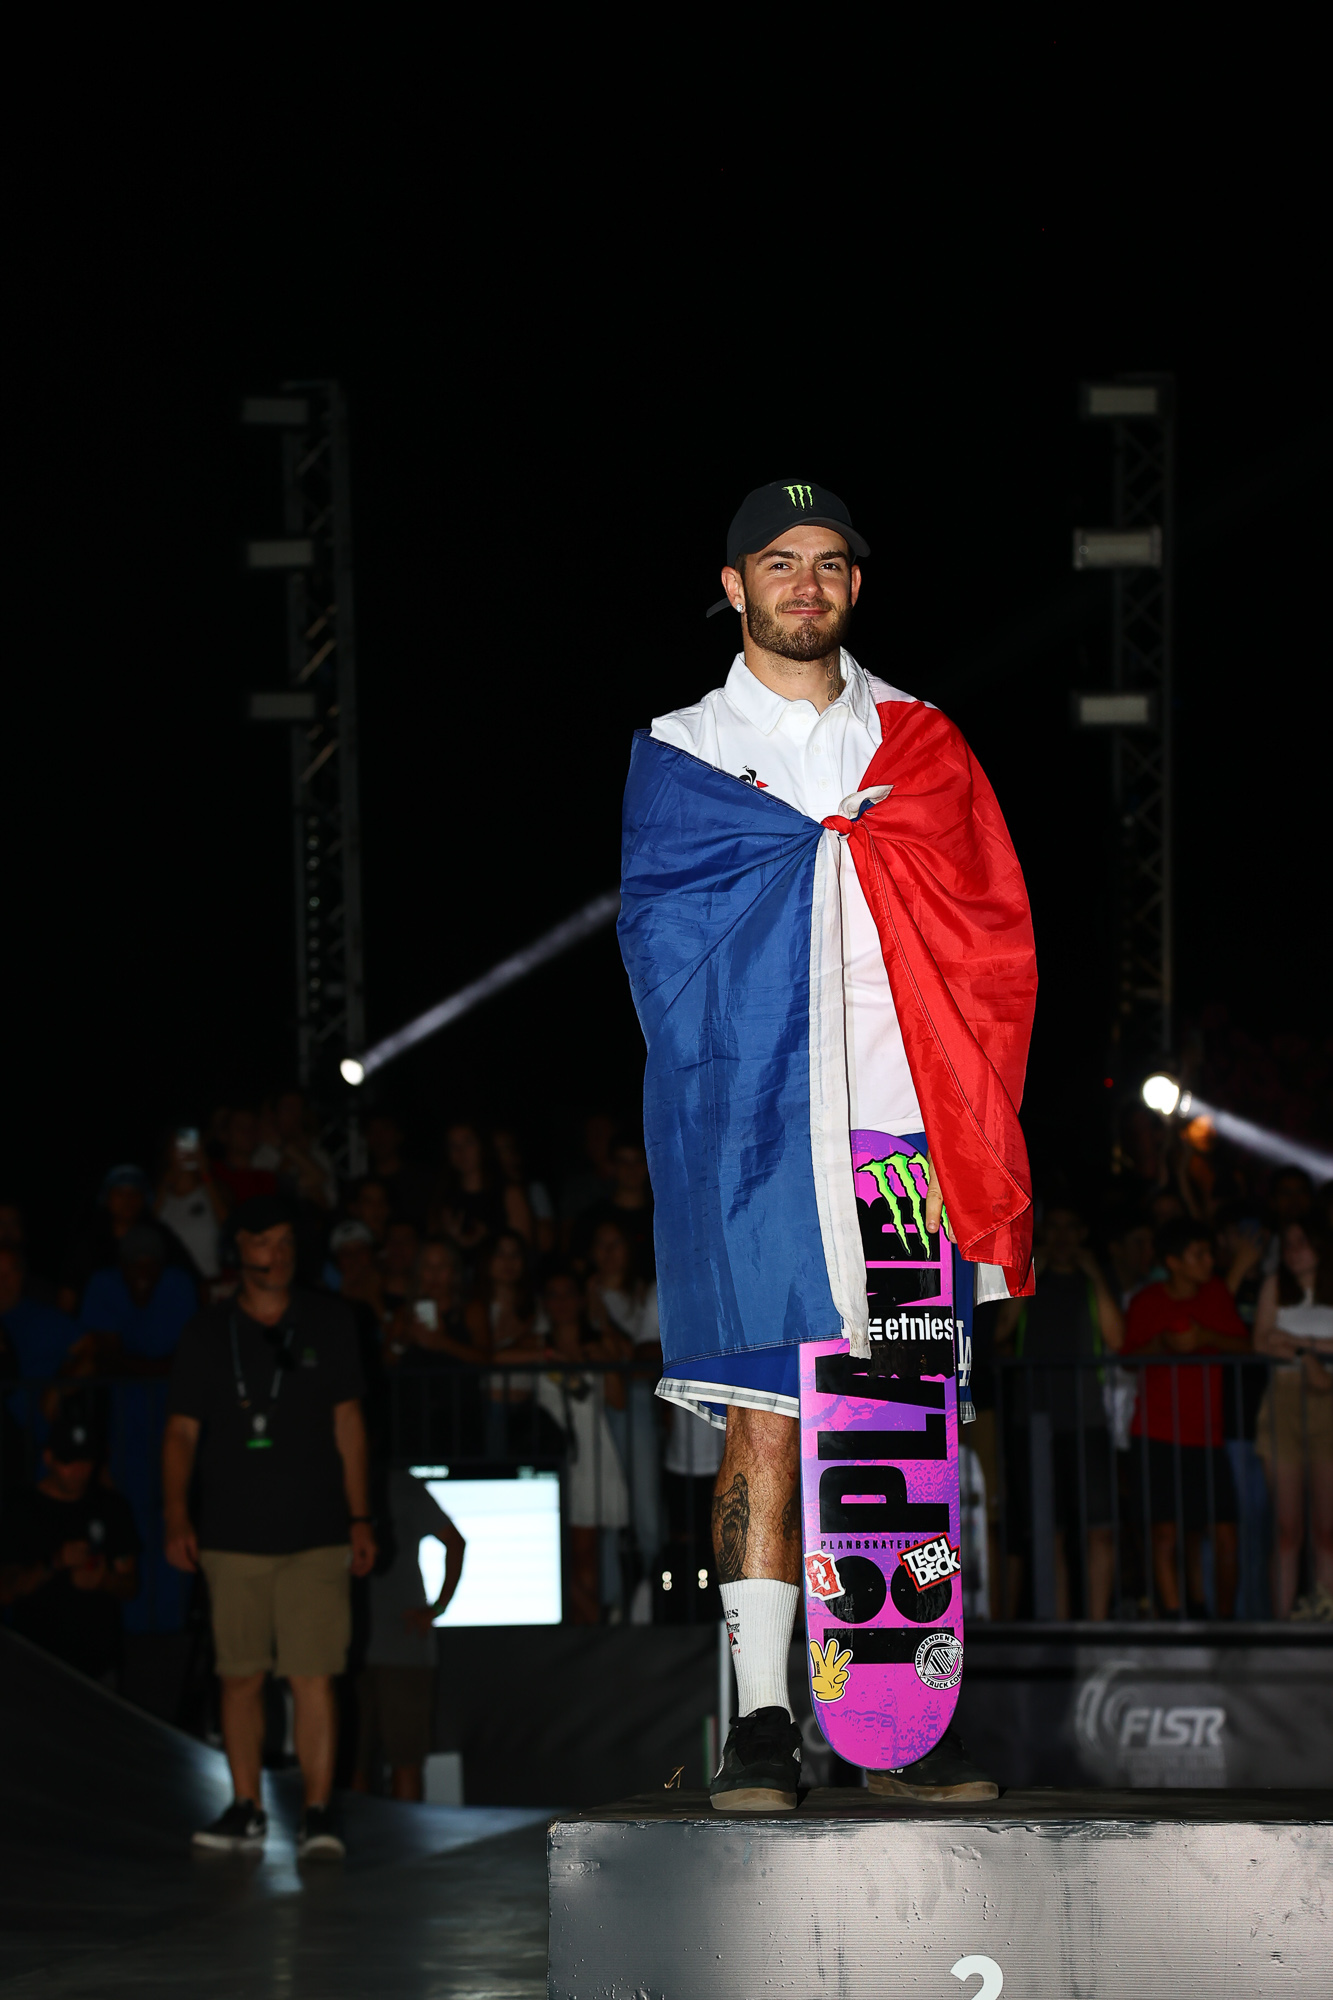 Monster Energy's French Team Rider Aurelien Giraud Takes Second Place in in World Street Skateboarding Championships Rome 2022 which is an Official Olympic Qualifier Event for Paris 2024